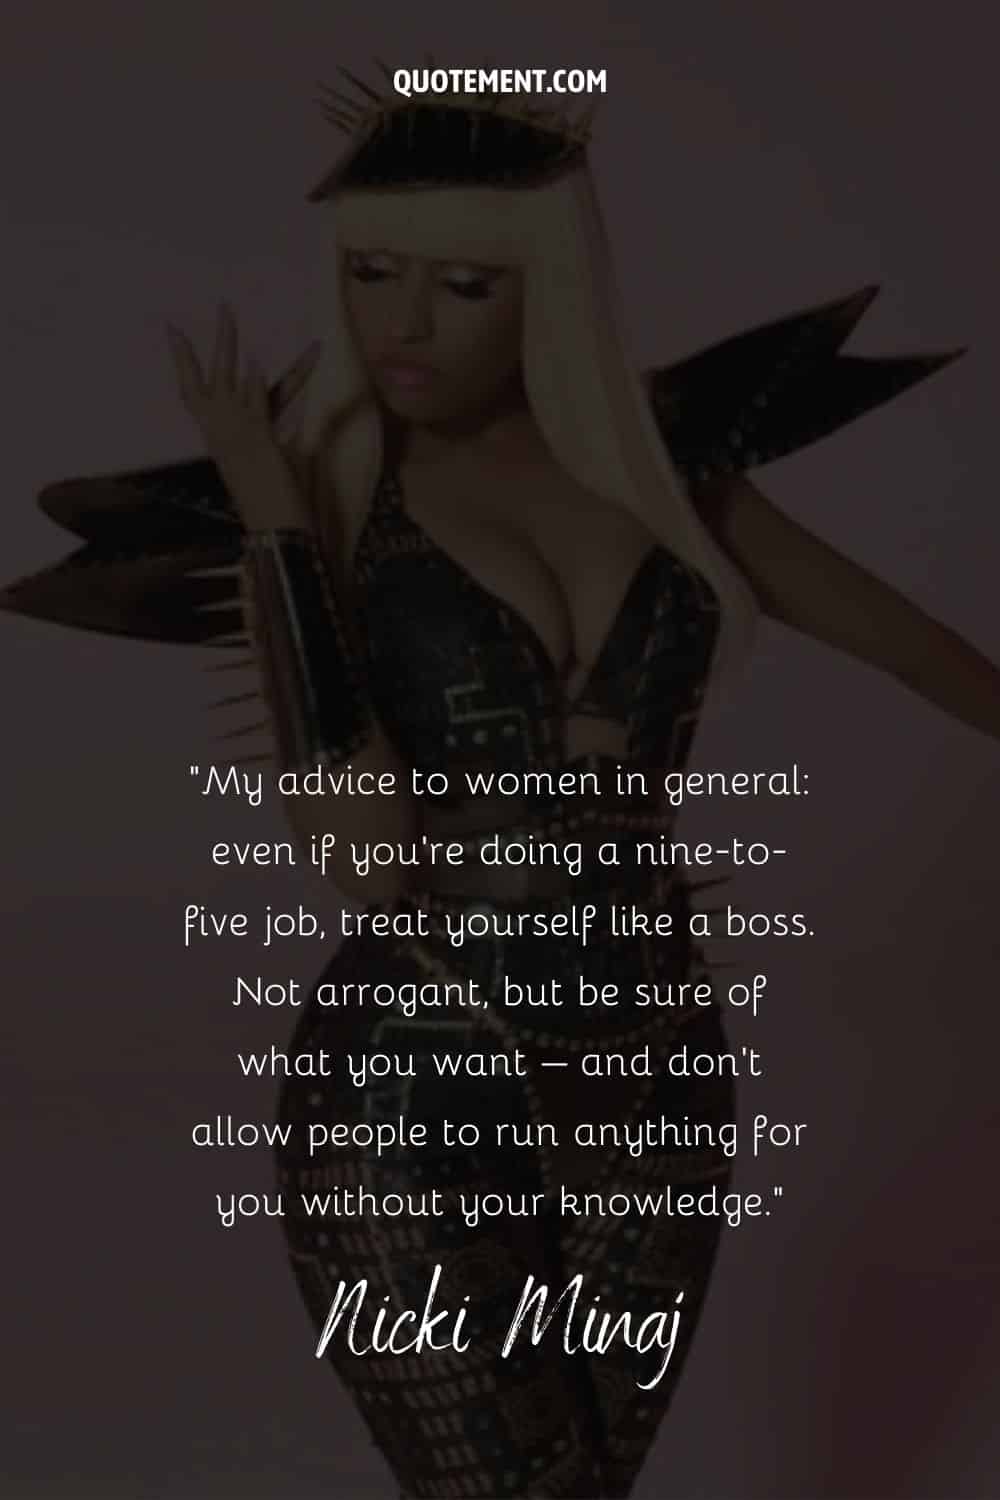 Inspirational quote by Nicki Minaj talking about treating yourself like a boss, and her photo in the background